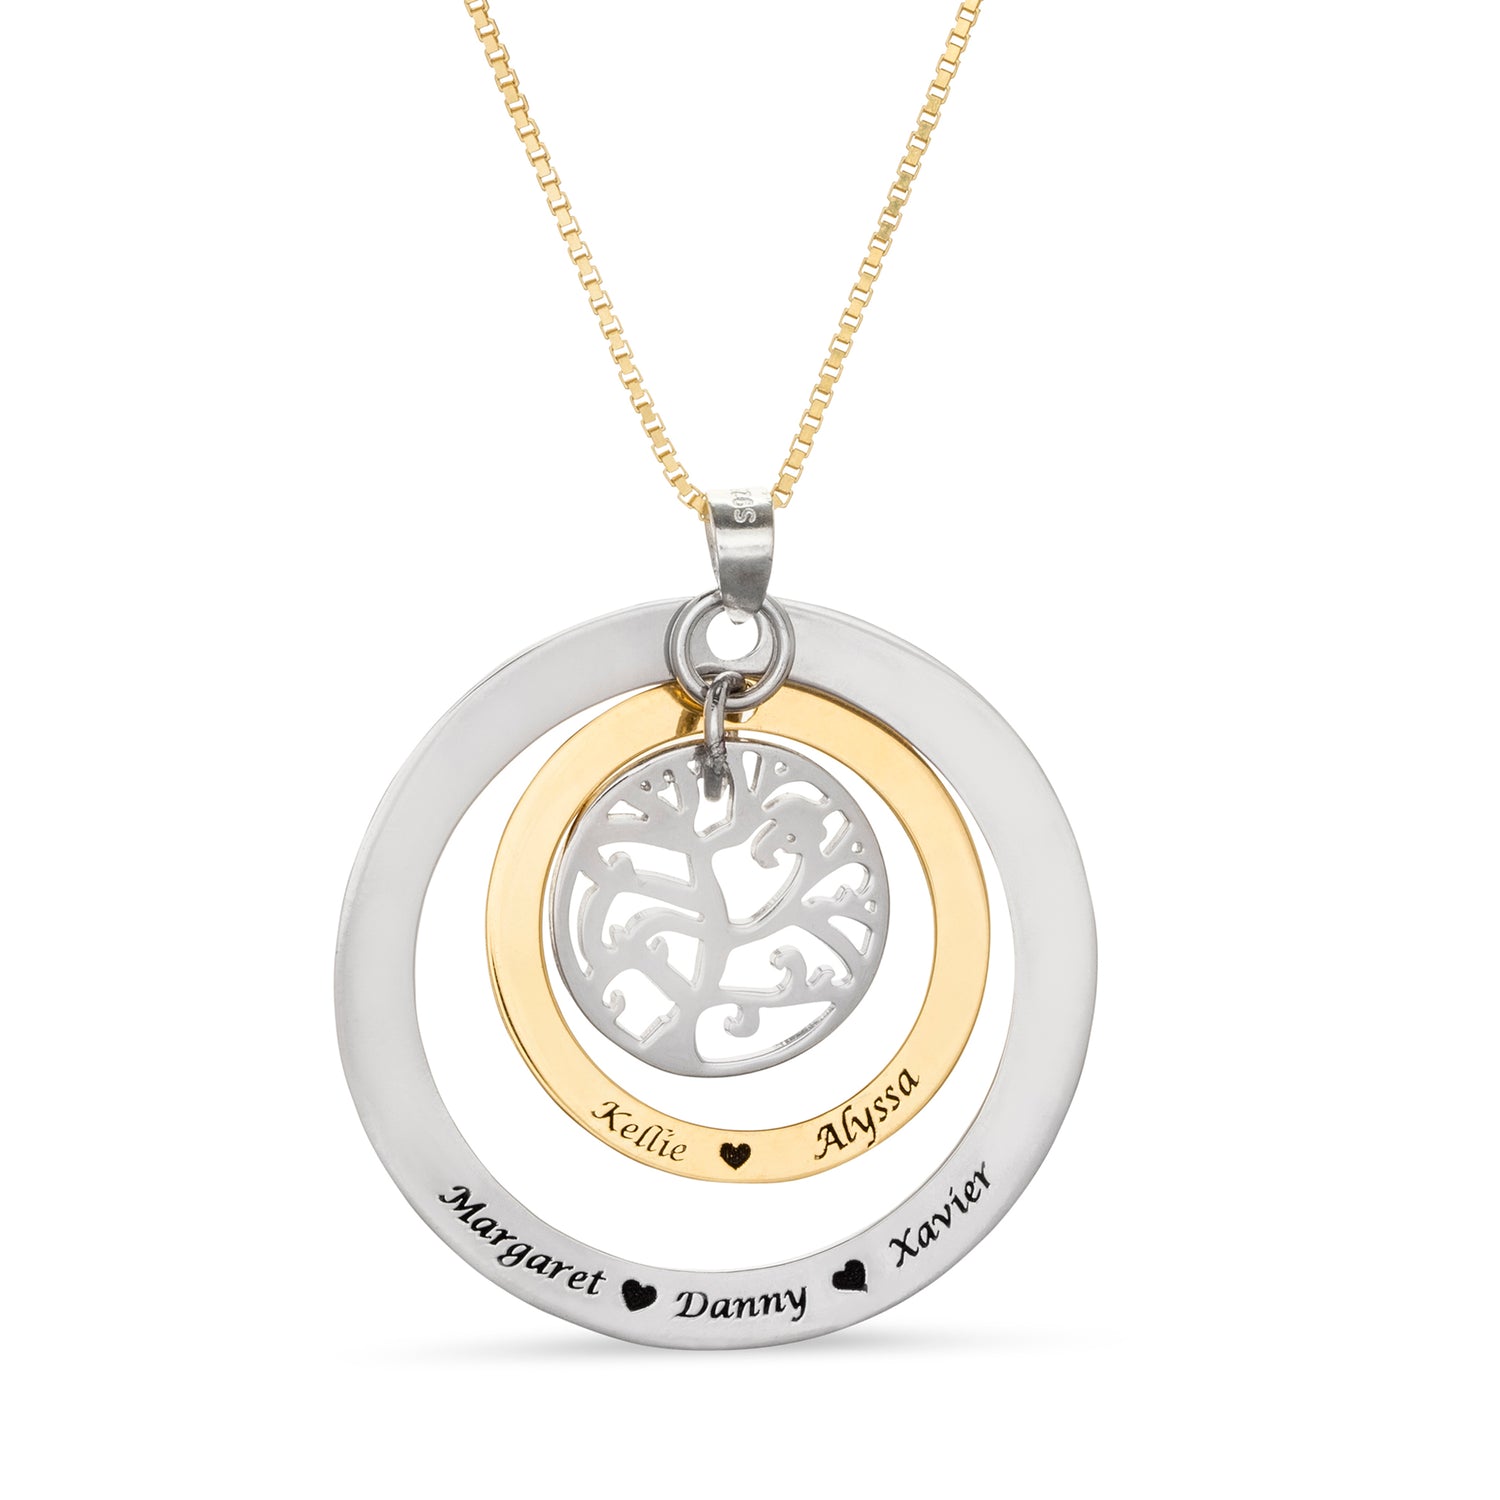 Circles Of Loved Ones Family Tree Necklace